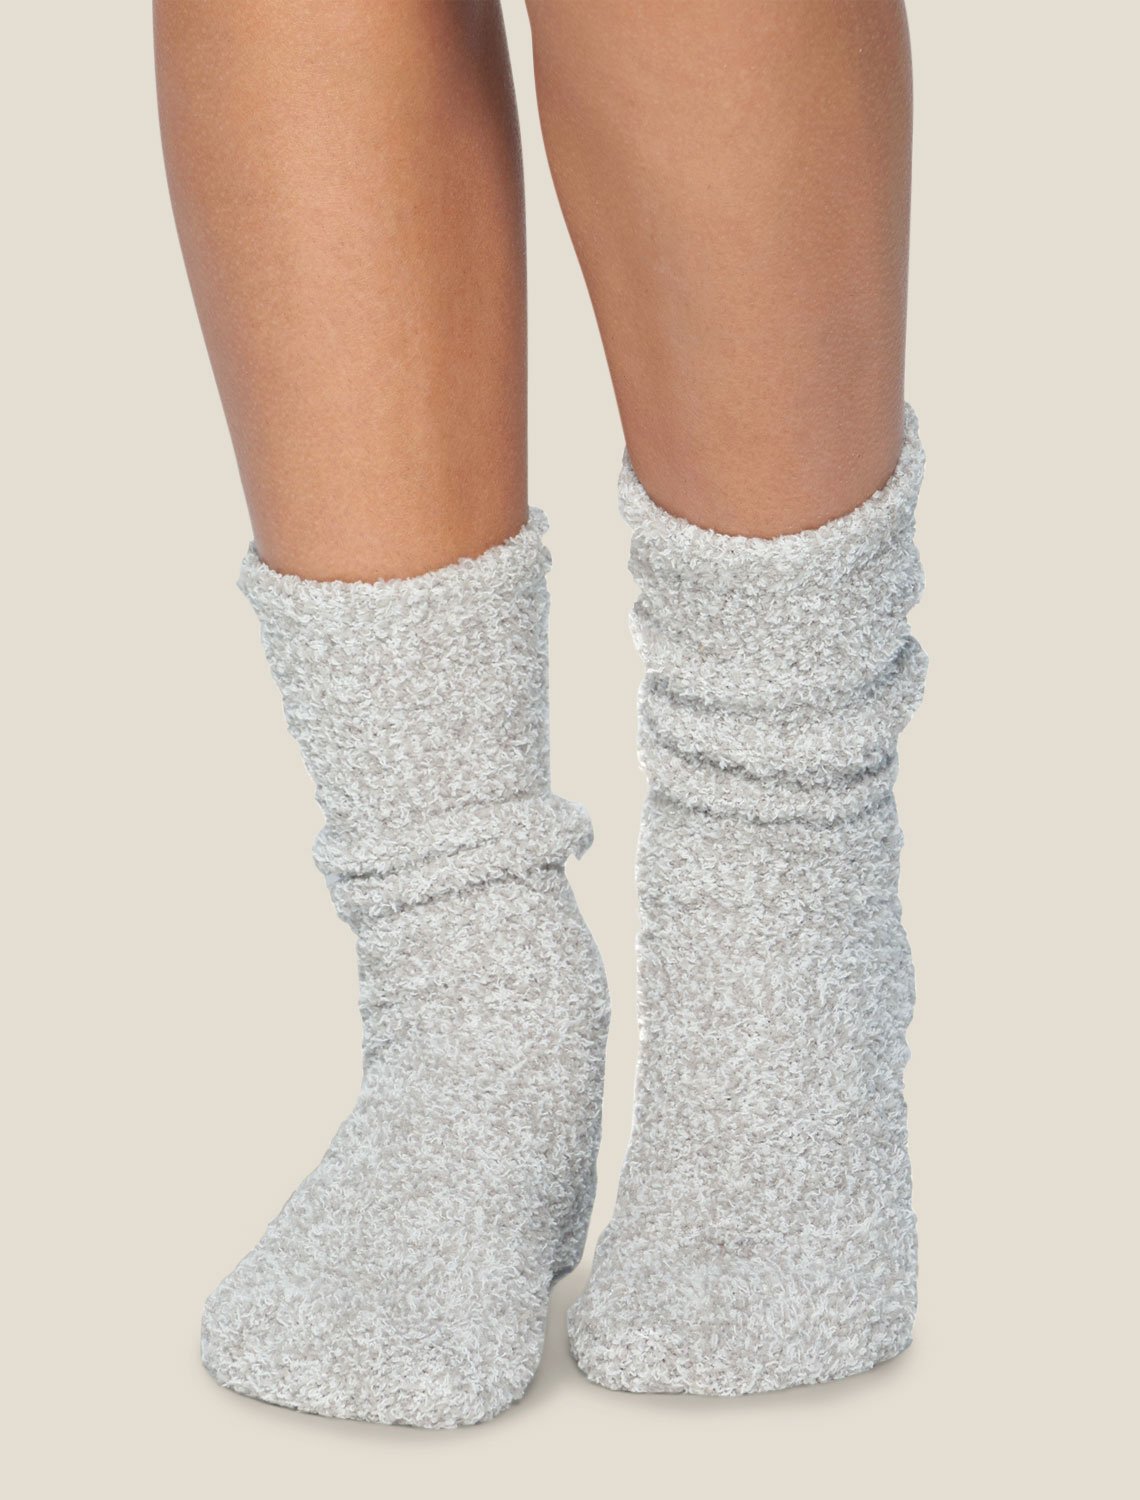 https://www.blissboutiques.com/cdn/shop/products/bliss-bouqitues-barefoot-dreams-cozychic-heathered-socks-in-oyster-white-oyster-white-o-s-16543565709409.jpg?v=1605977866